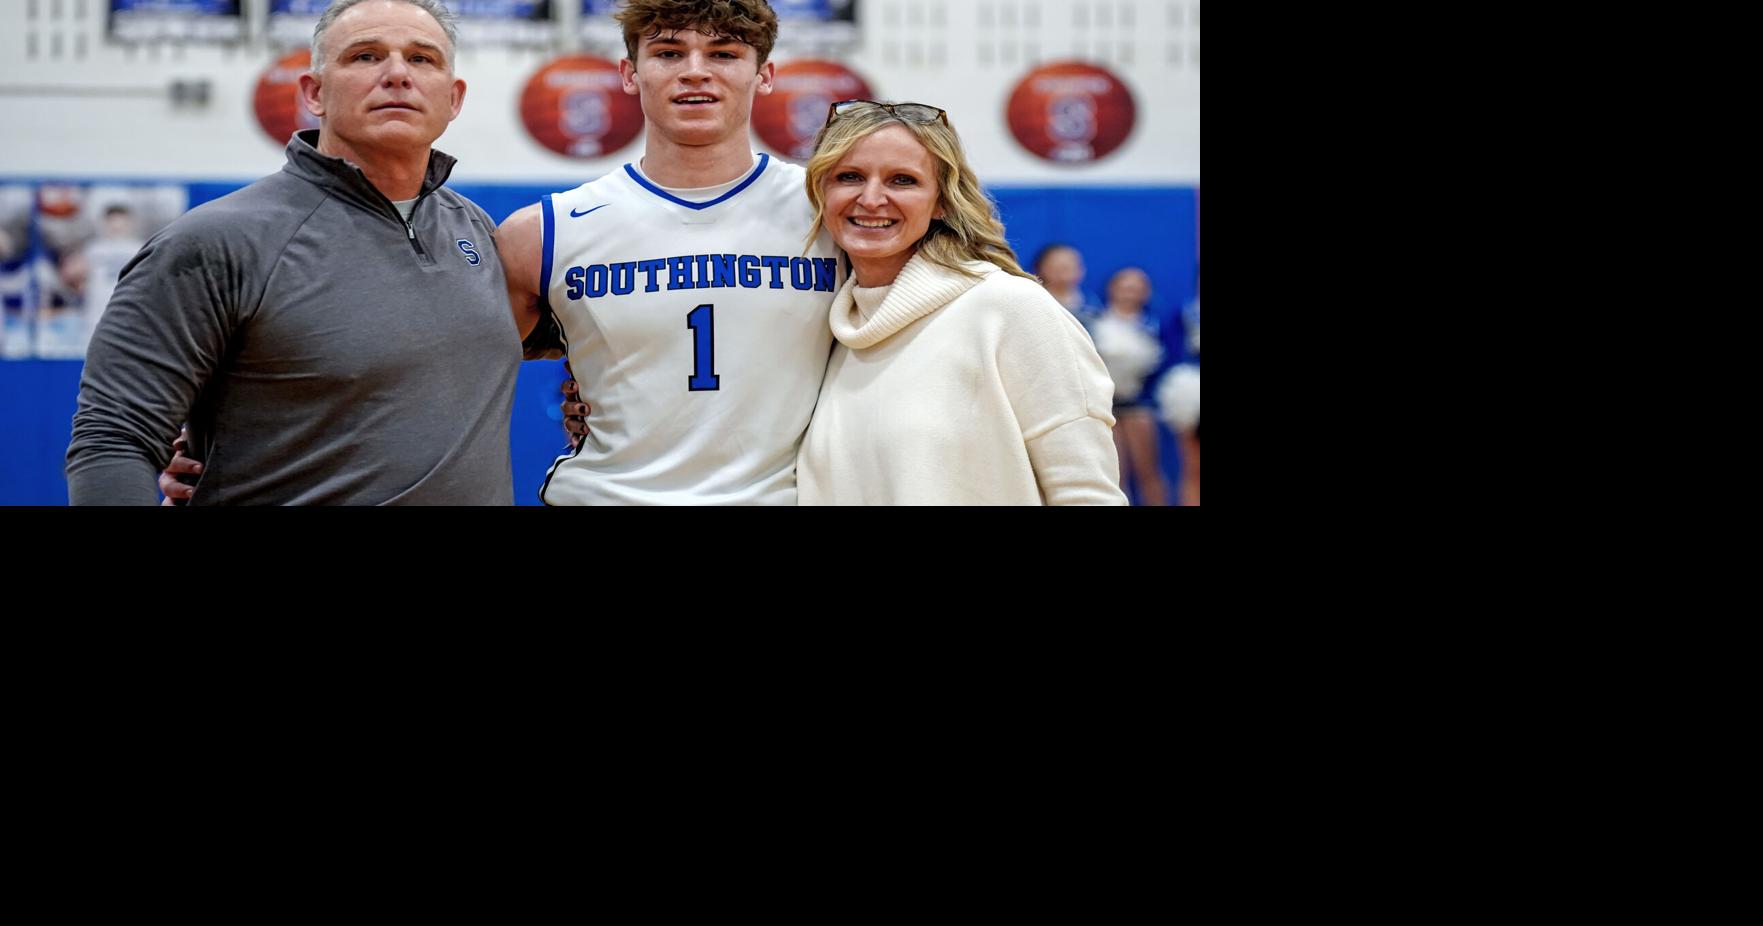 Ryan Hammarlund Commits to Roger Williams University for Basketball – Fulfilling a Childhood Dream